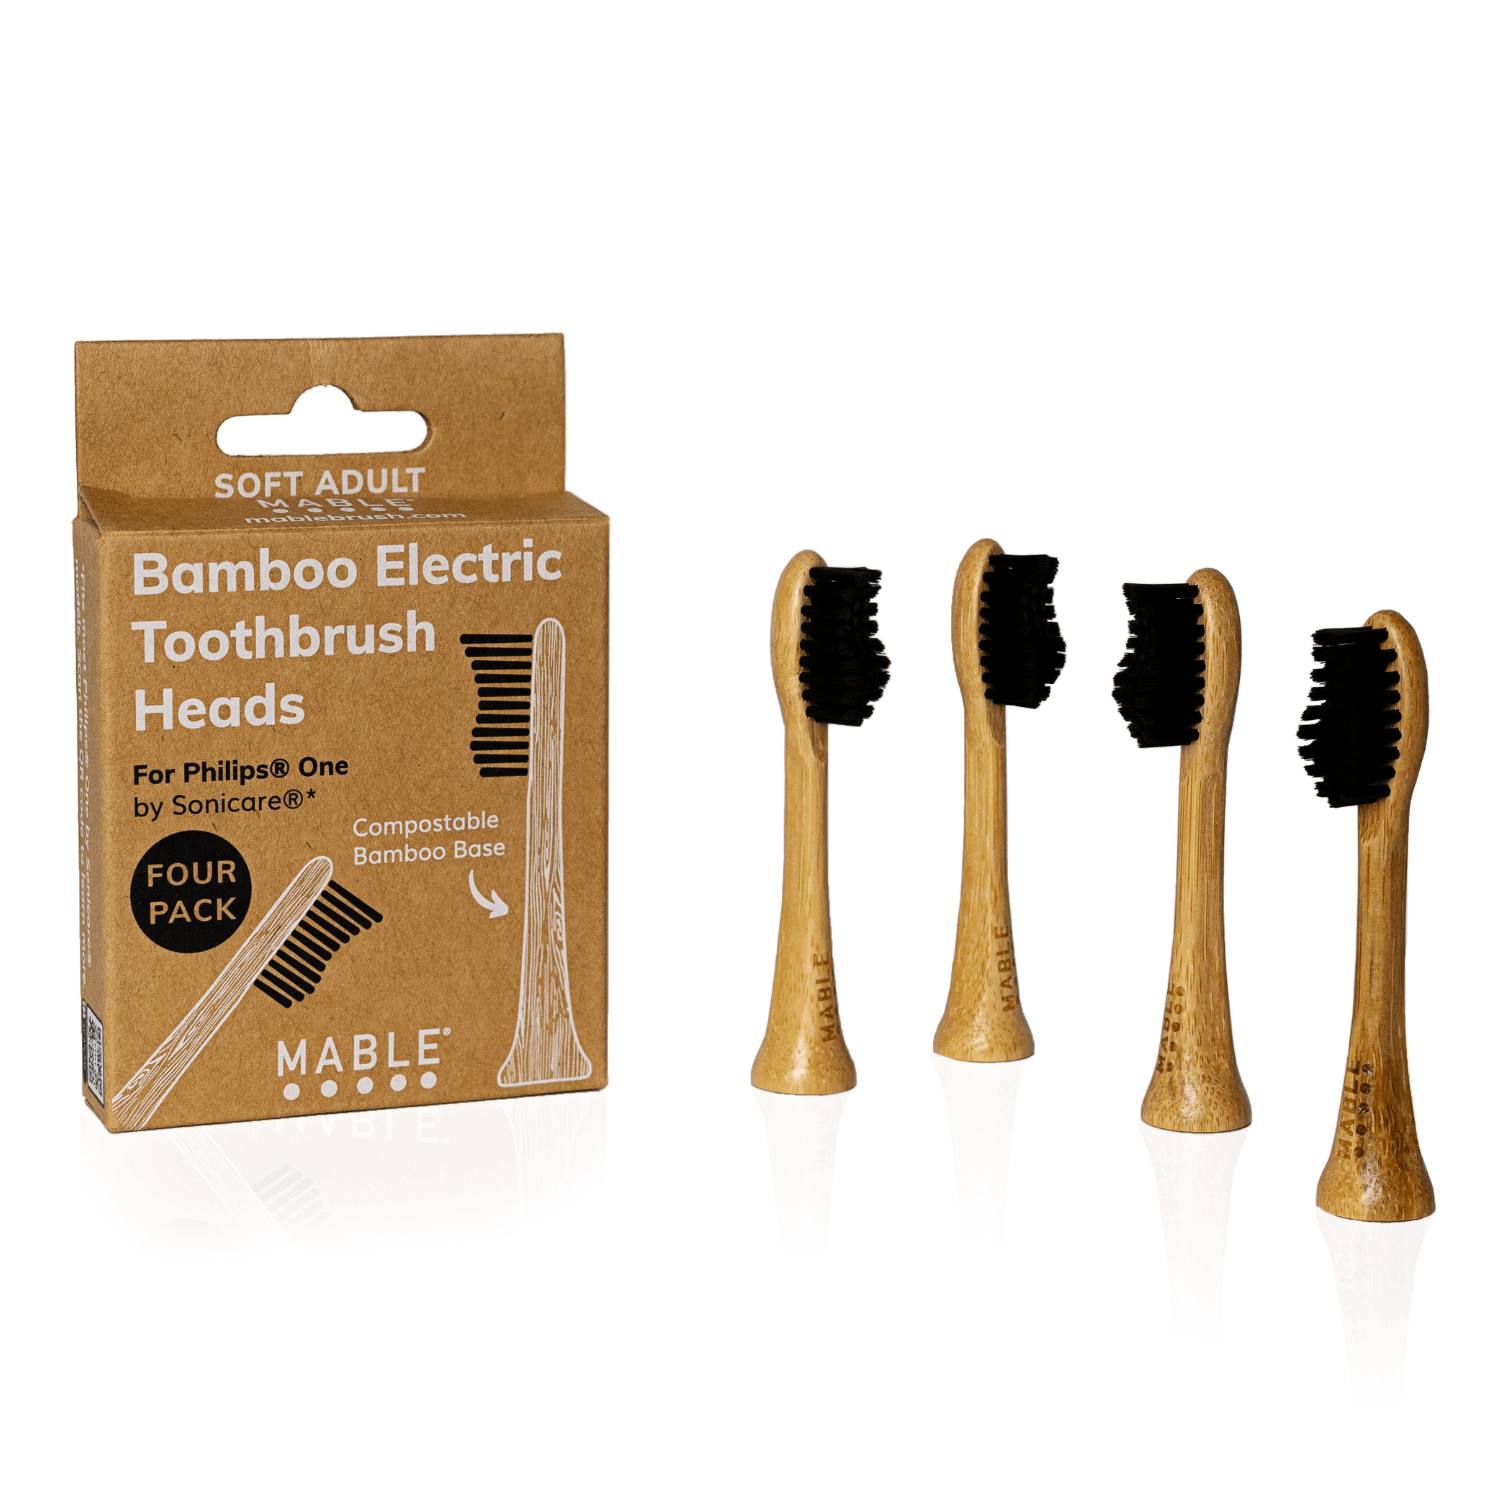 MABLE Electric Toothbrush Heads, Biodegradable electric toothbrush head, Replacement heads for Phillips one toothbrush, Eco-friendly electric toothbrush heads